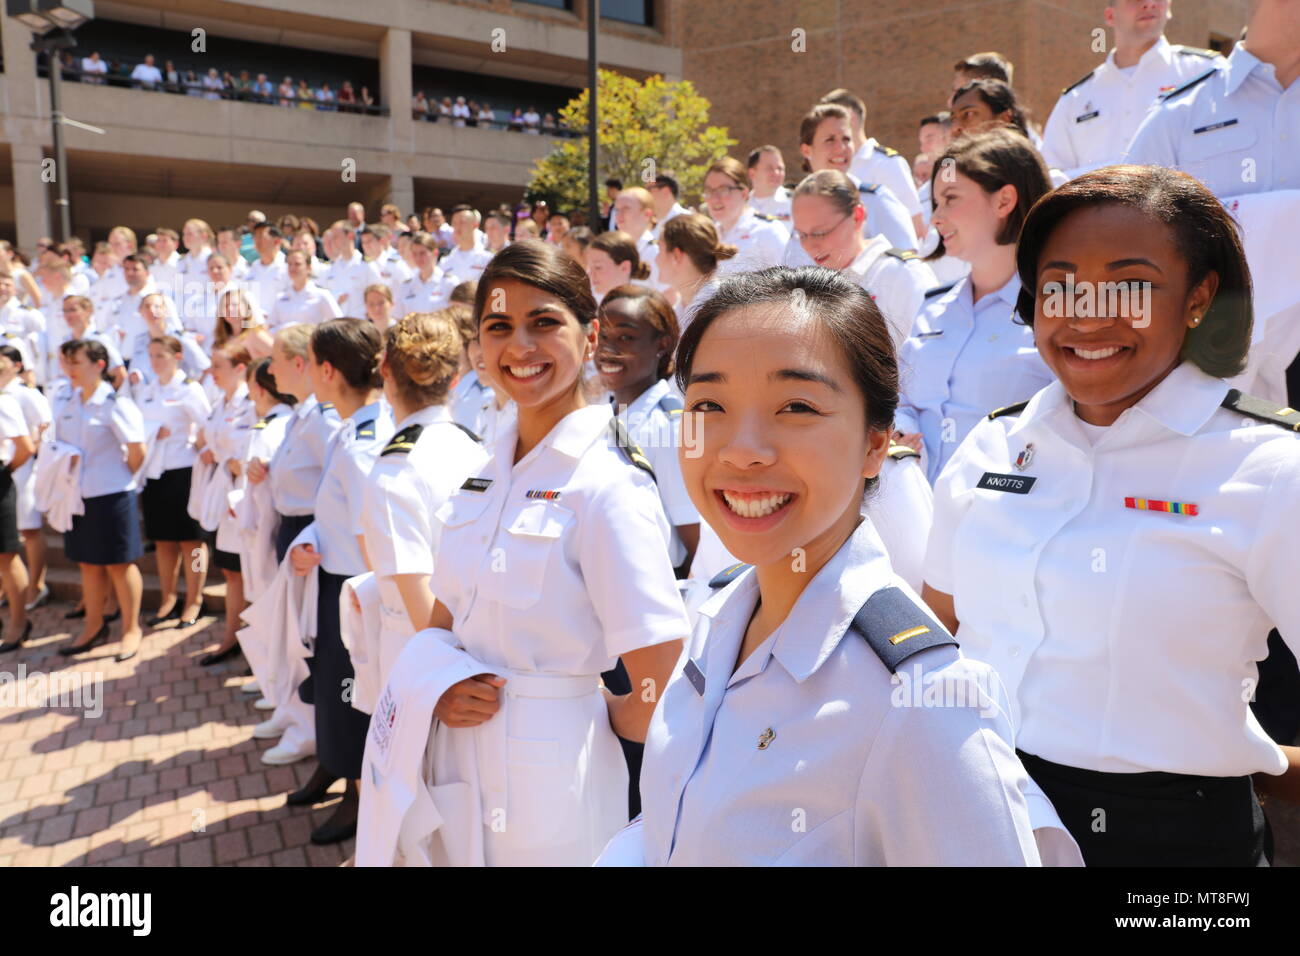 U.S. Public Health Service Ensign Naina Mangalmurti, Air Force 2nd Lt. My  Linh Vu, and Army 2nd Lt. Brittney Knotts were among the nearly 170 uniformed  medical students from the DoD's F.